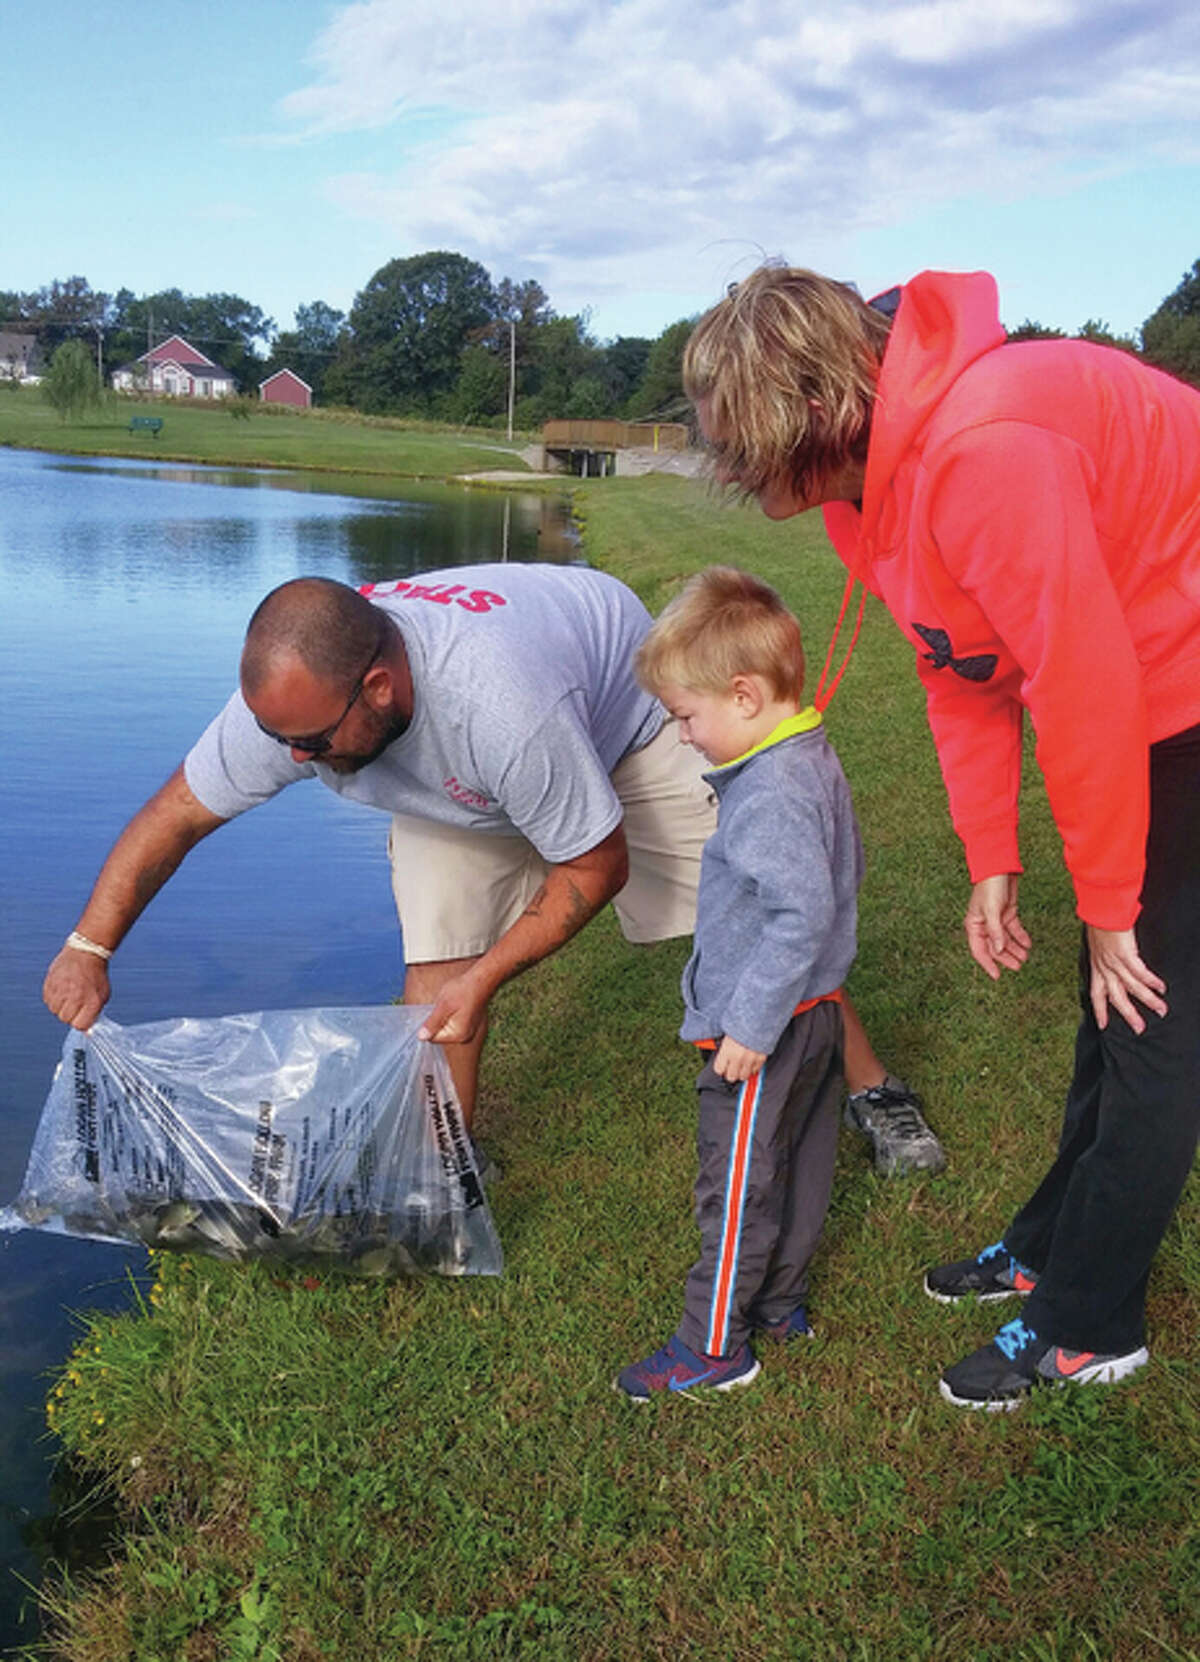 Carson Hutchens, 3 years old, of Jerseyville, watched in awe with his mother, Amy Hutchens, as John Stiles, JPRD Recreation Supervisor, release fish into the lake on Wednesday morning.